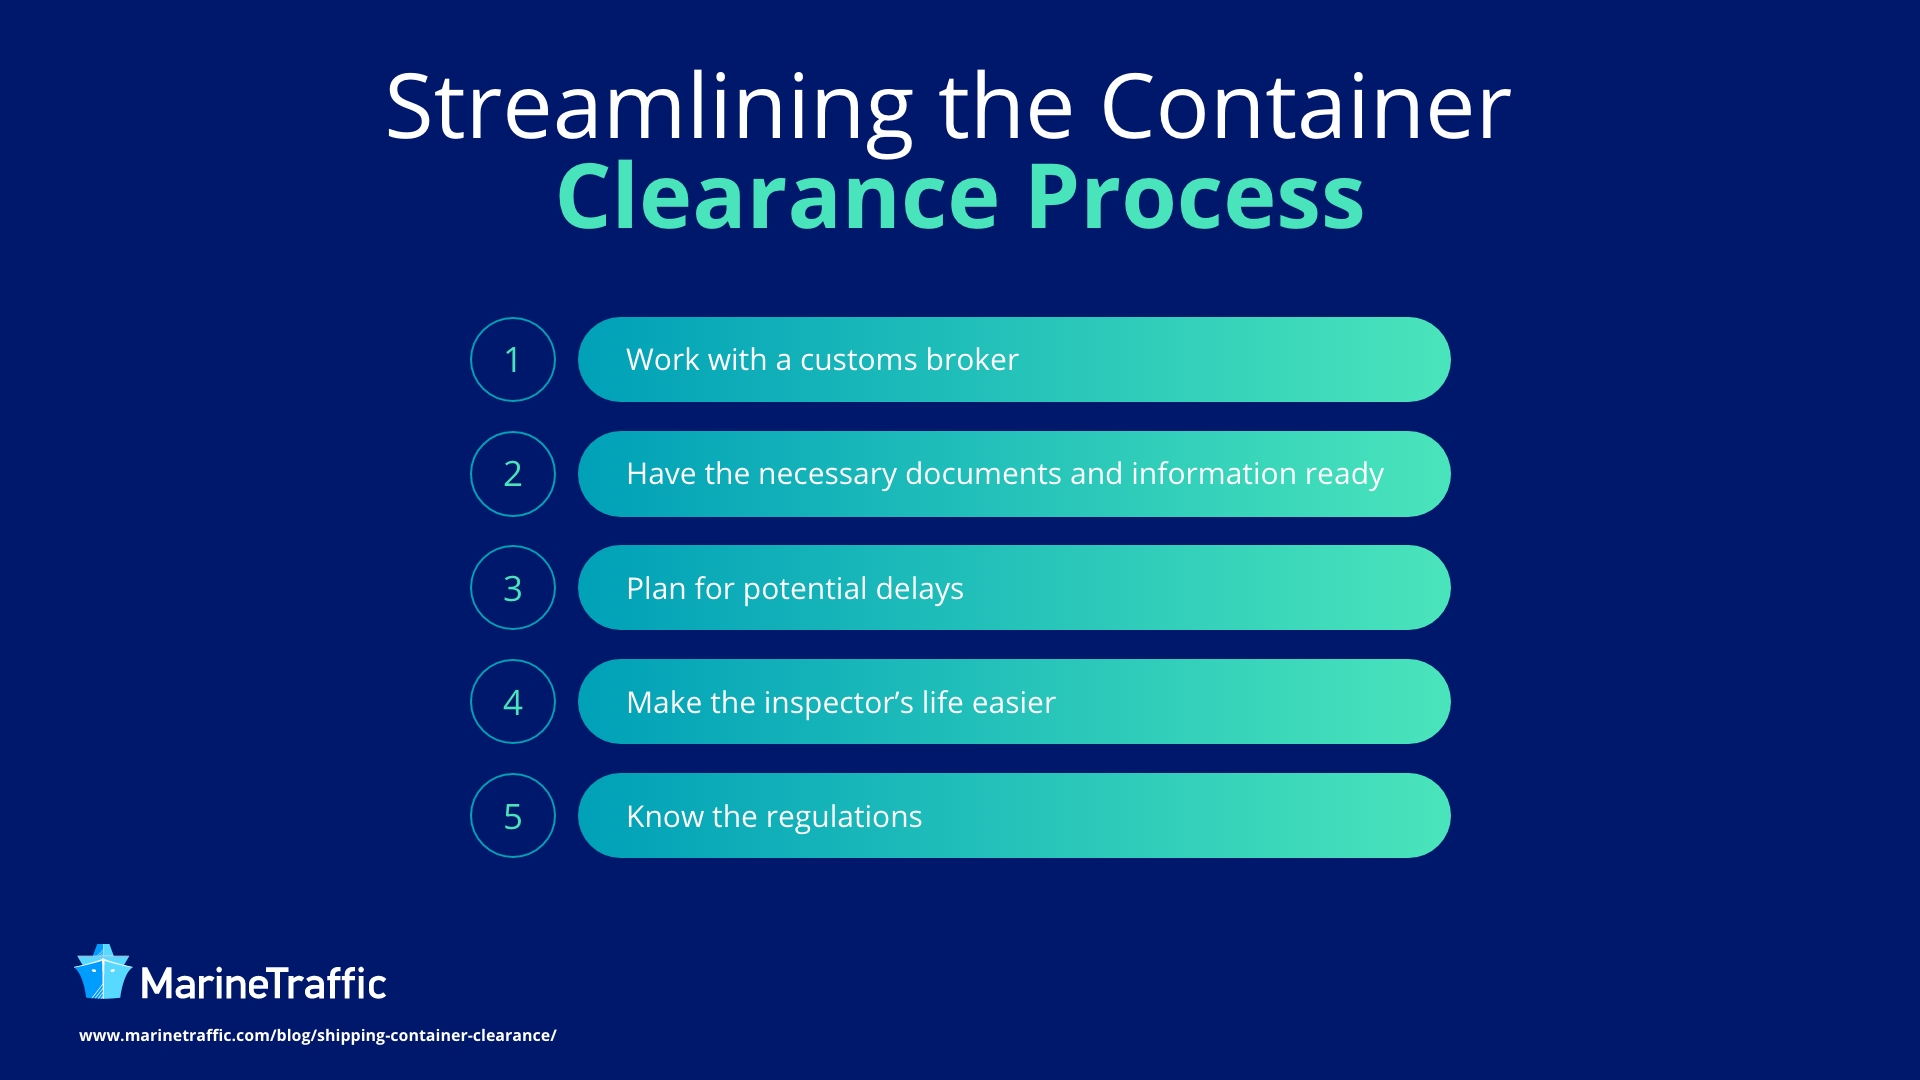 Streamlining the container clearance process